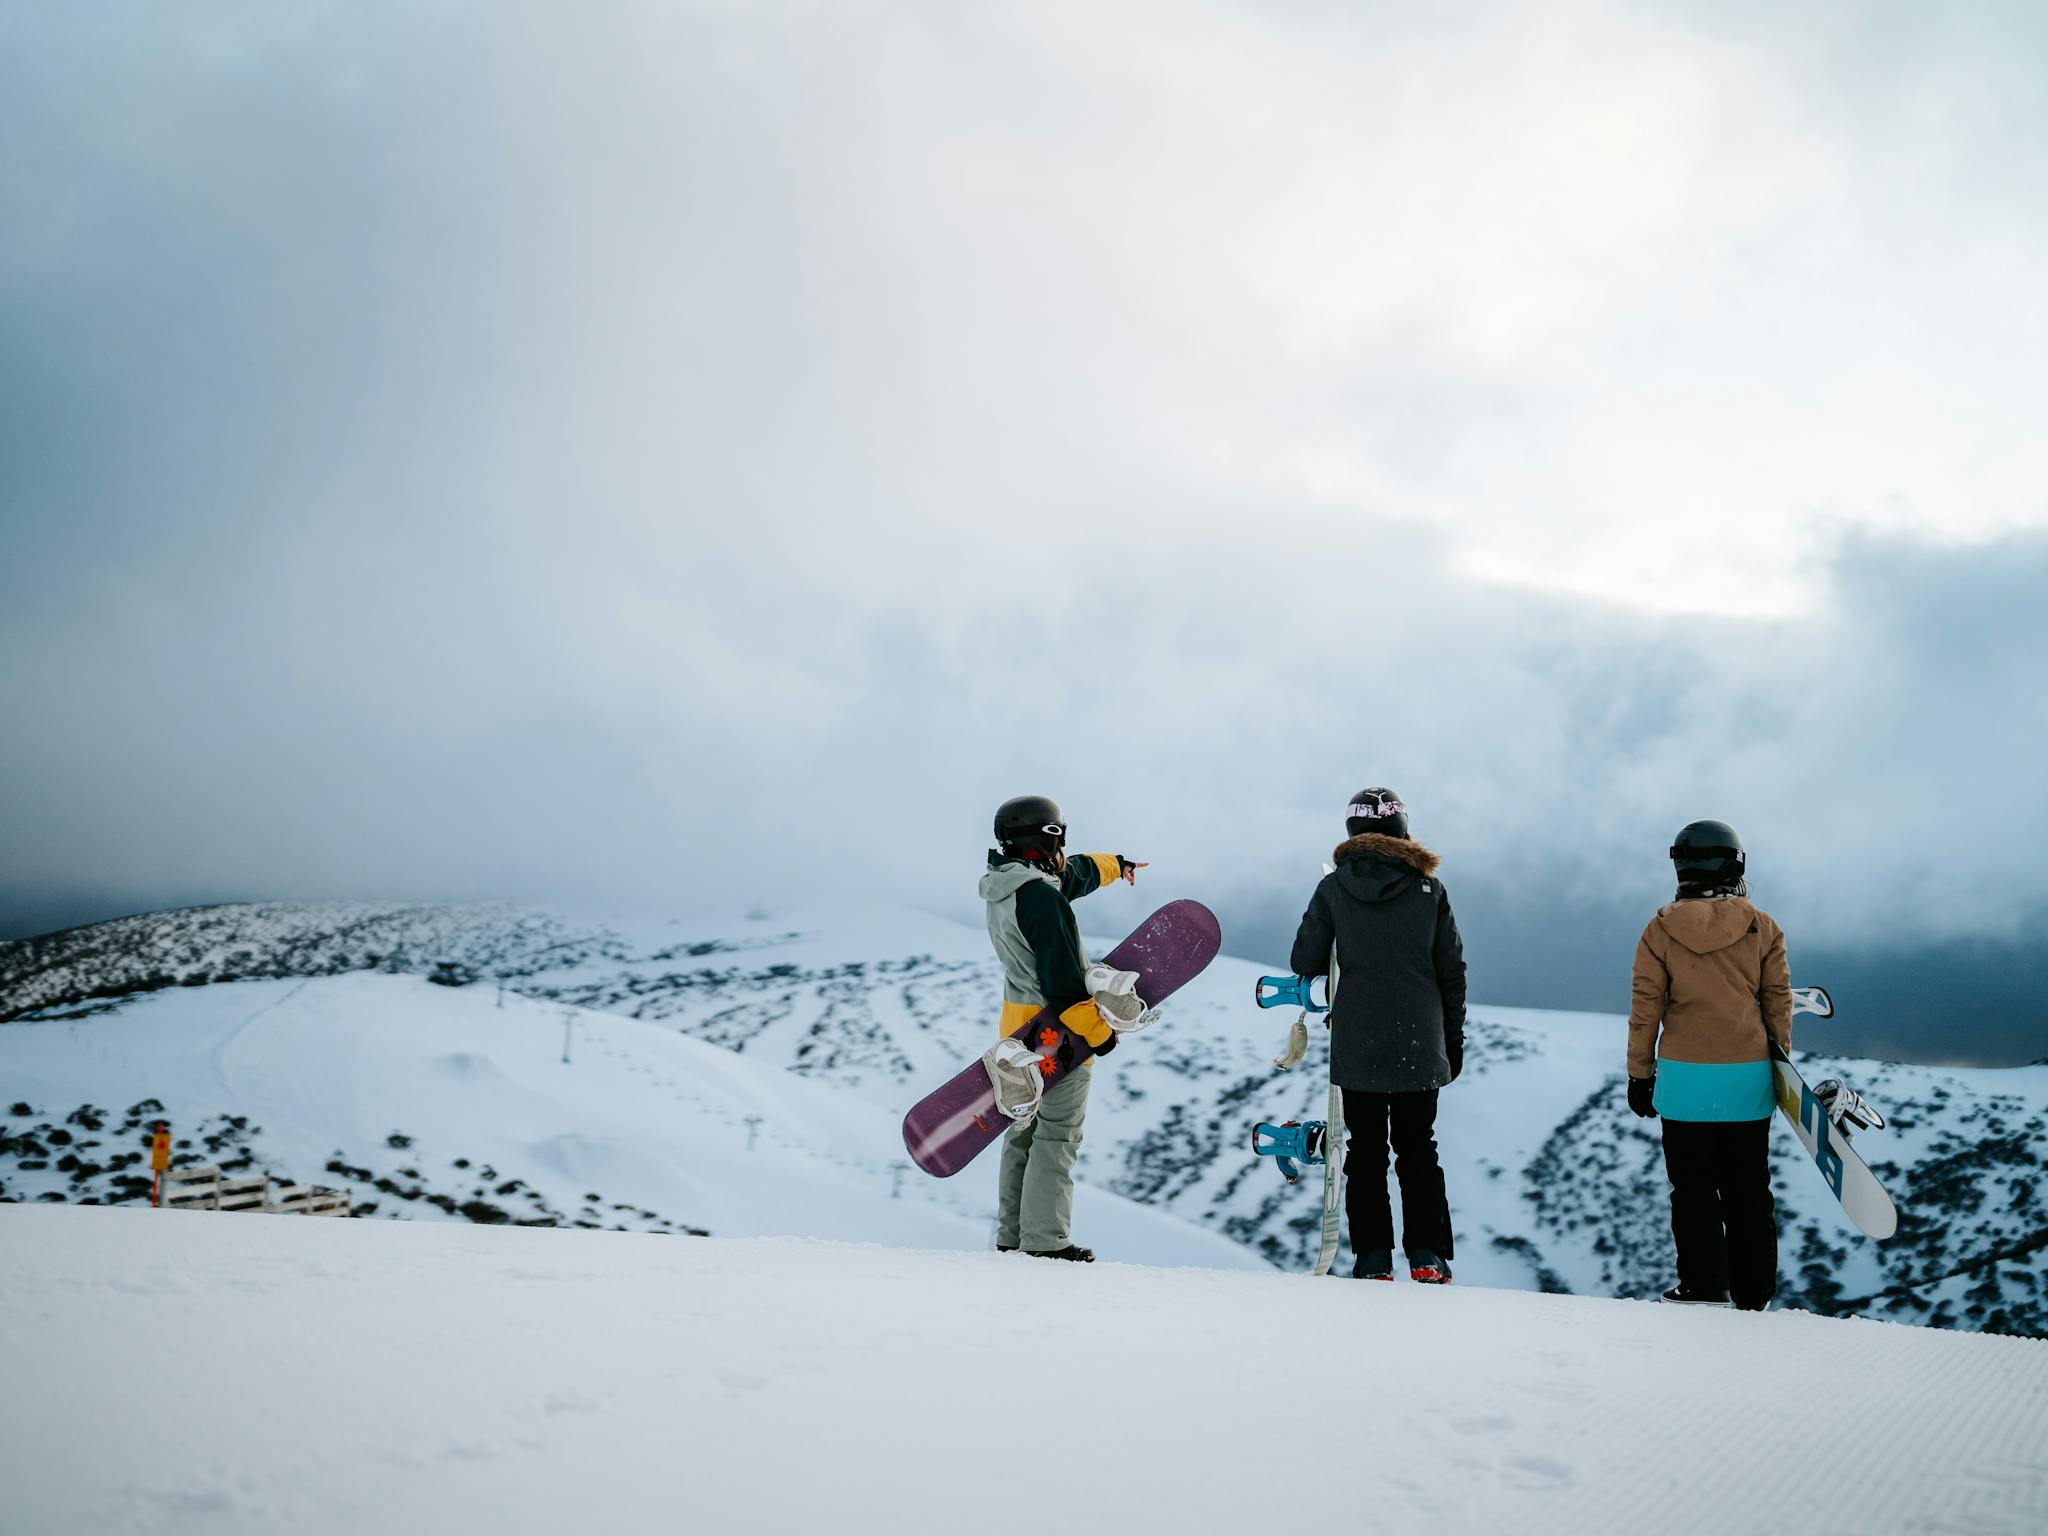 Snowboarders taking in the views from a snowy Mt Hotham